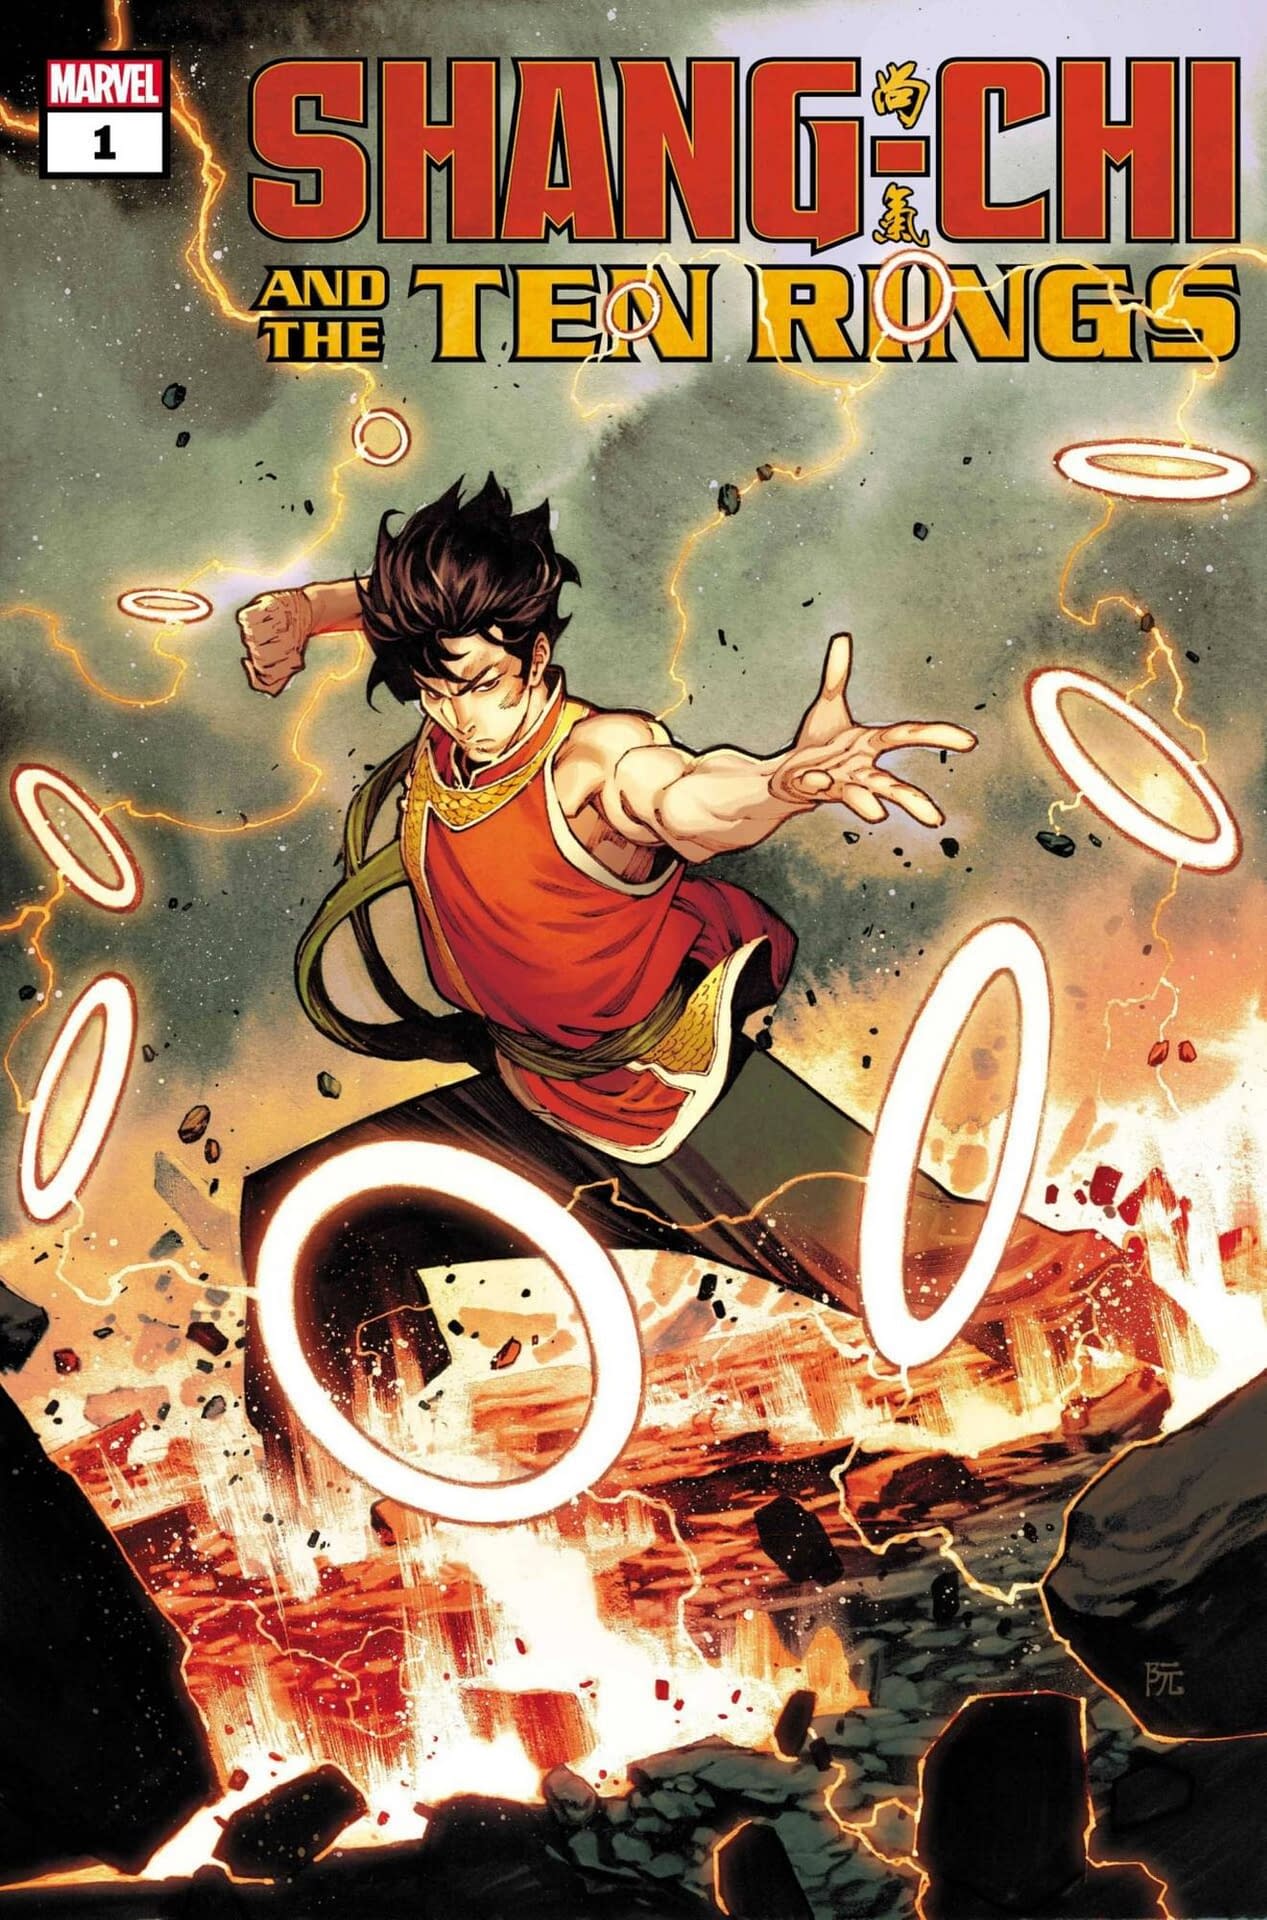 Marvel Cancels Shang-Chi #13, Replaced By Shang-Chi & The Ten Rings